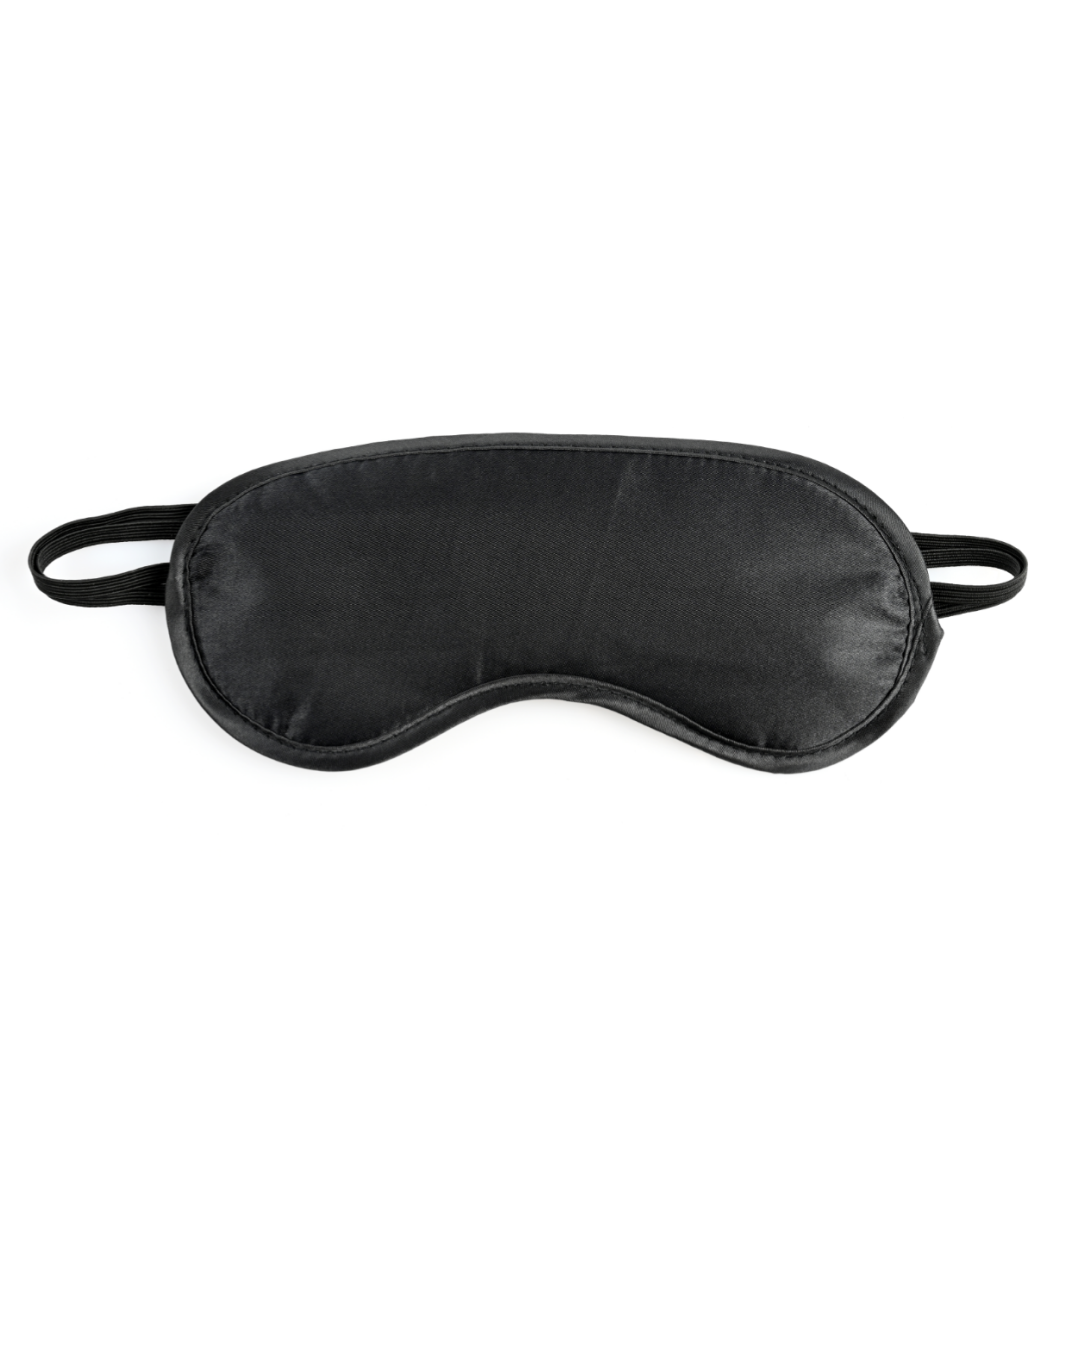 Sportsheets Cuffs and Blindfold Set - Special Edition mask alone